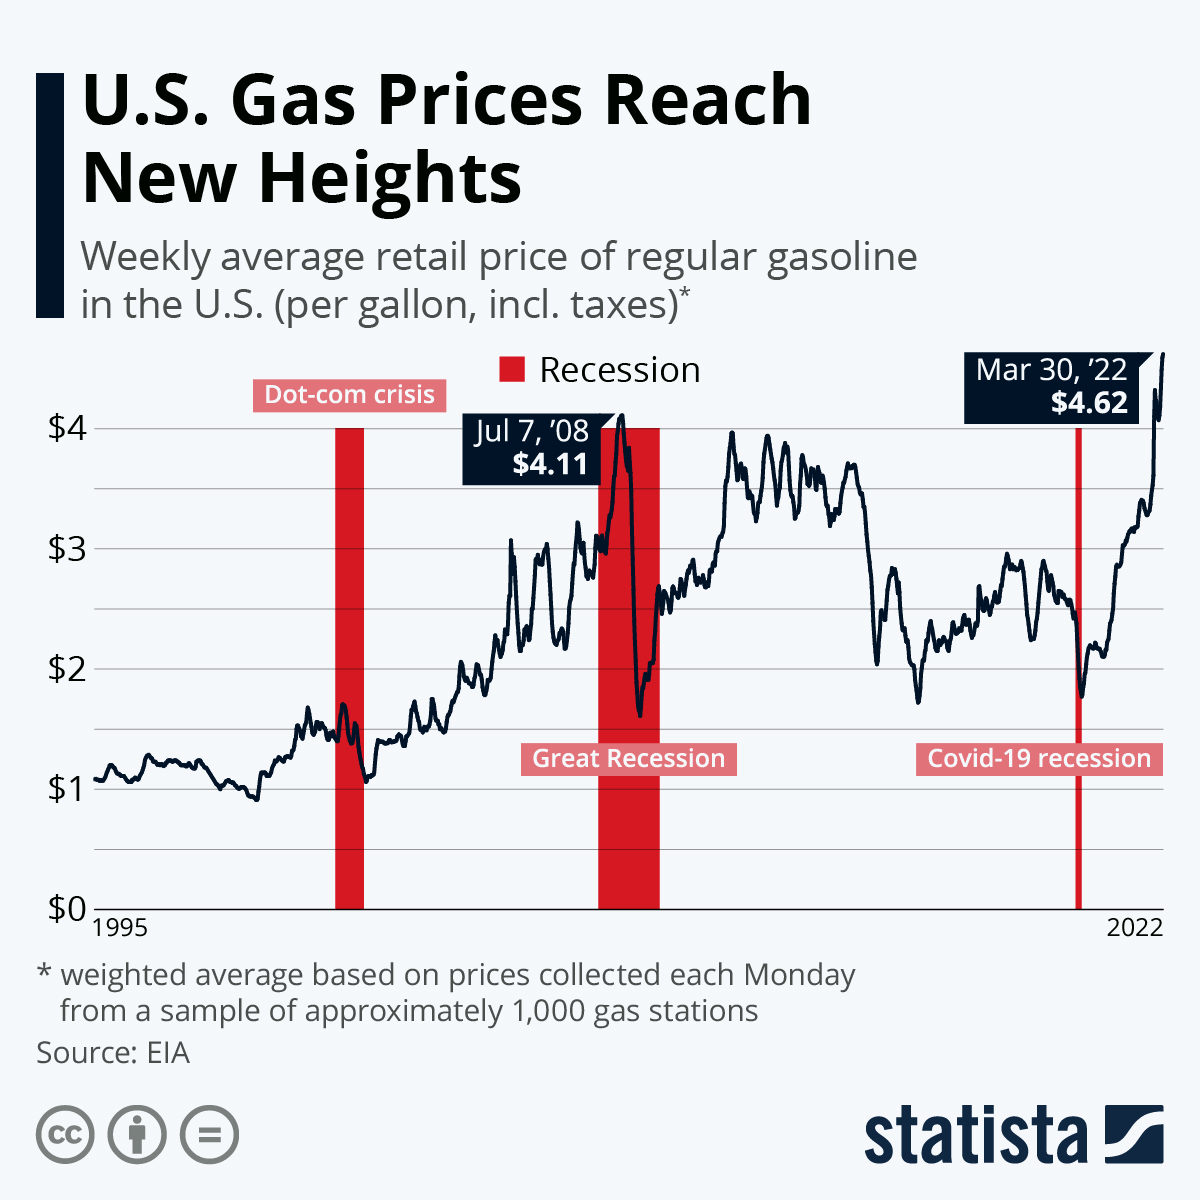 U.S. Gas Prices Reach New Heights